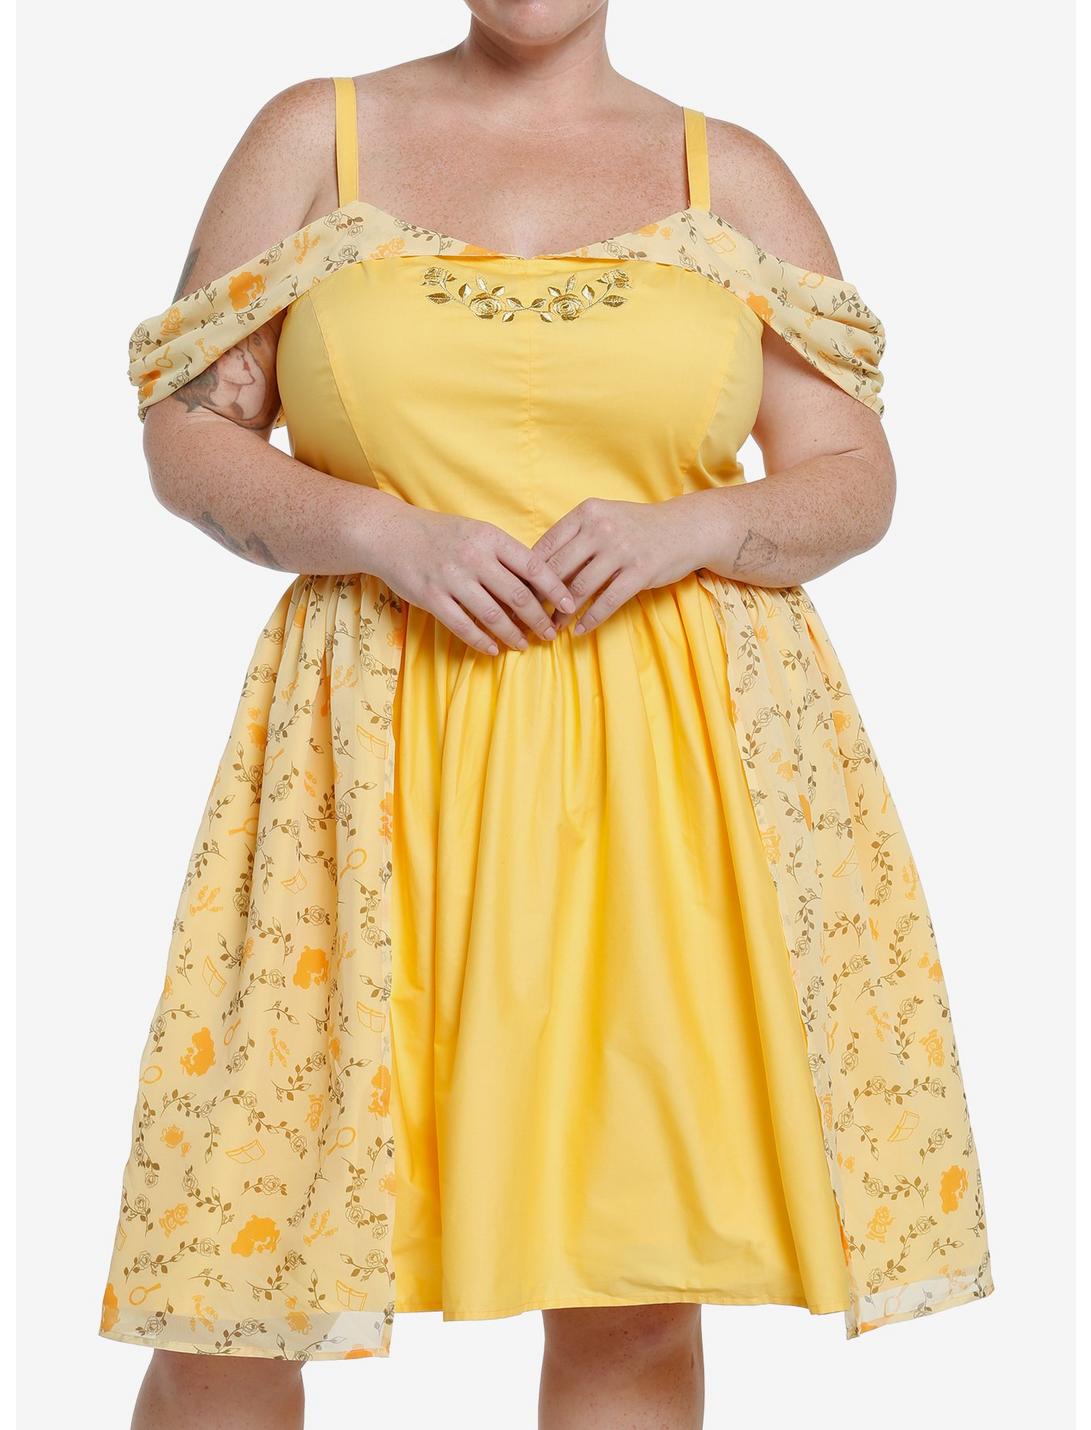 Her Universe Disney Beauty And The Beast Belle Cold Shoulder Dress Plus Size, BANANA YELLOW, hi-res